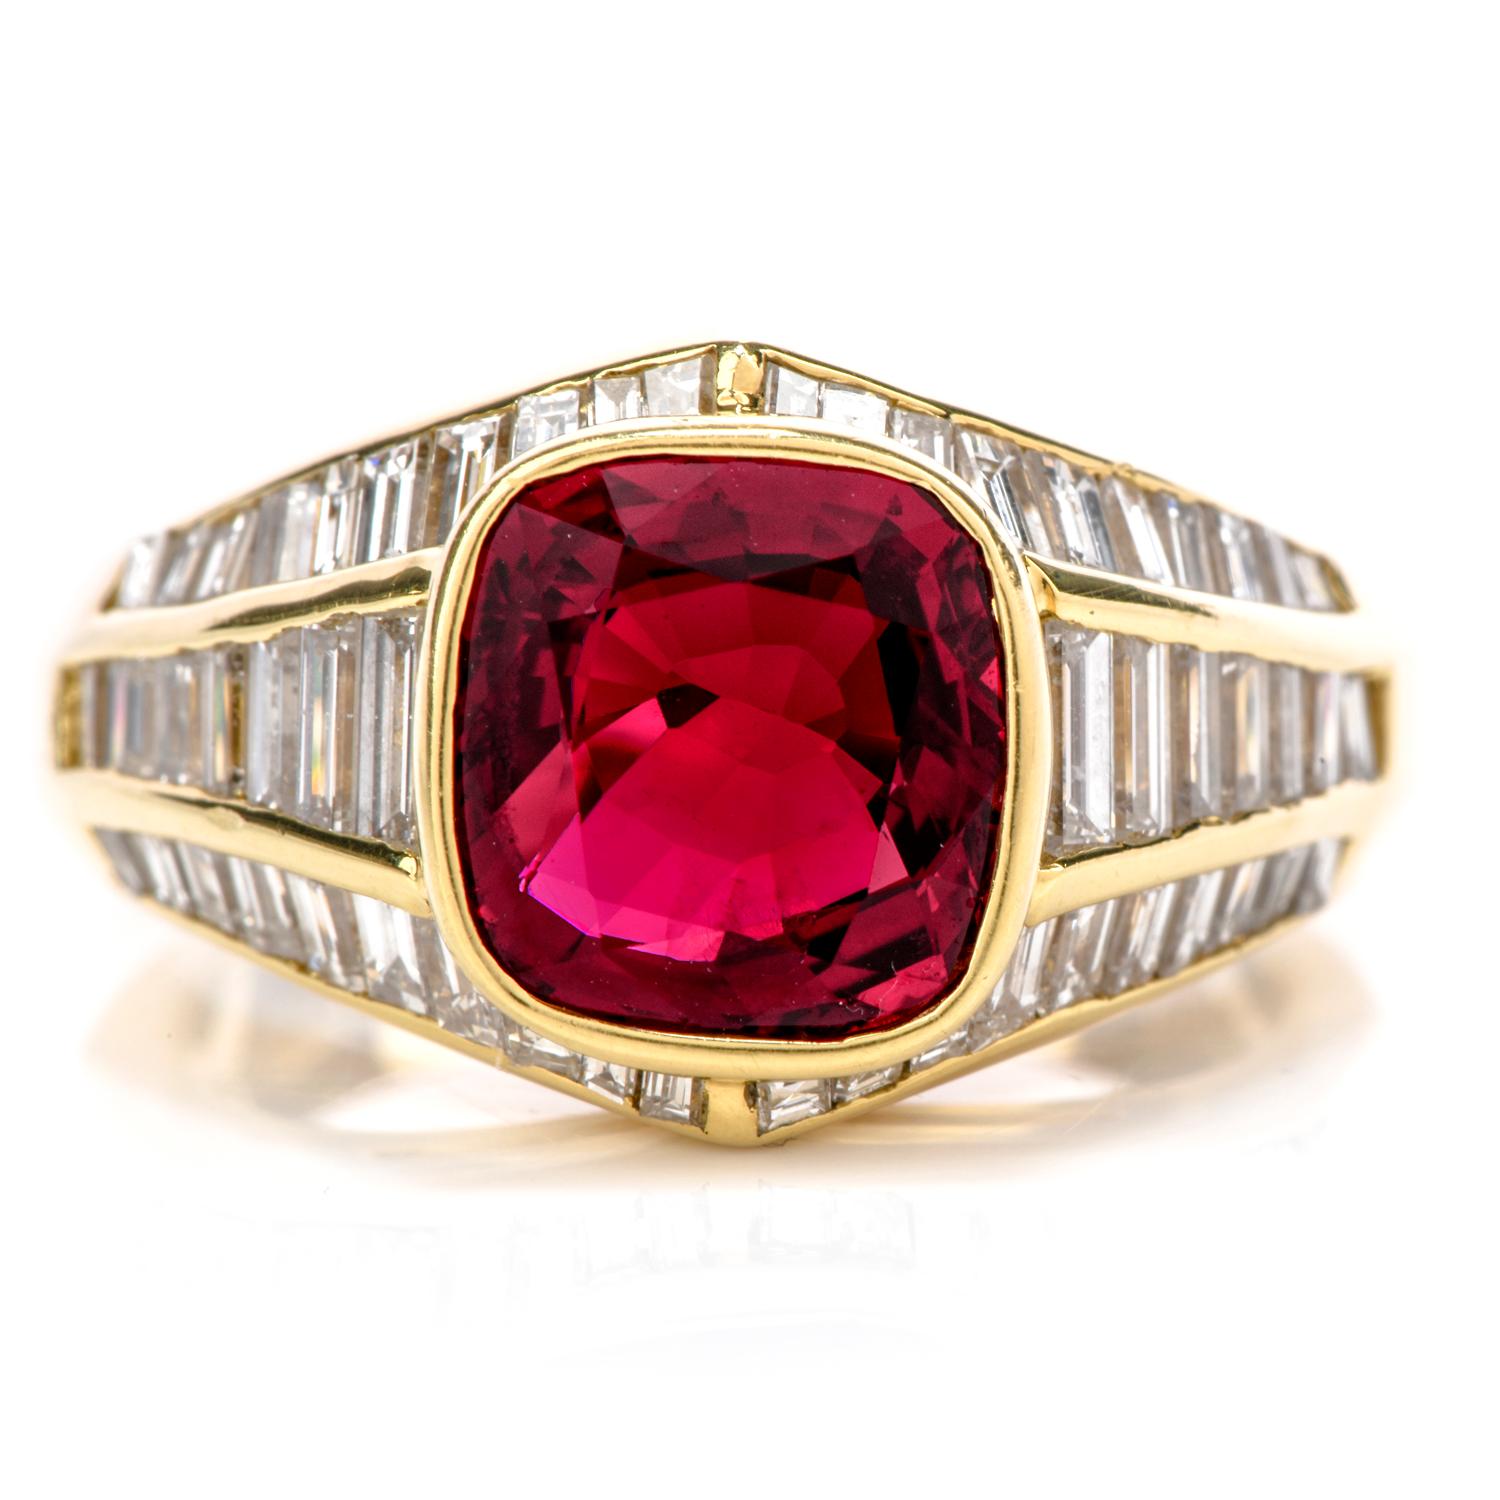 Throughout ancient times, to present day, rubies have signified passion, purity and nobility. Their lustrous deep red hue will bring a sense of pride when you wear it. 

This fantastic 3.49 Carat, Cushion Cut, Bezel Set Ruby & Diamond Ring will